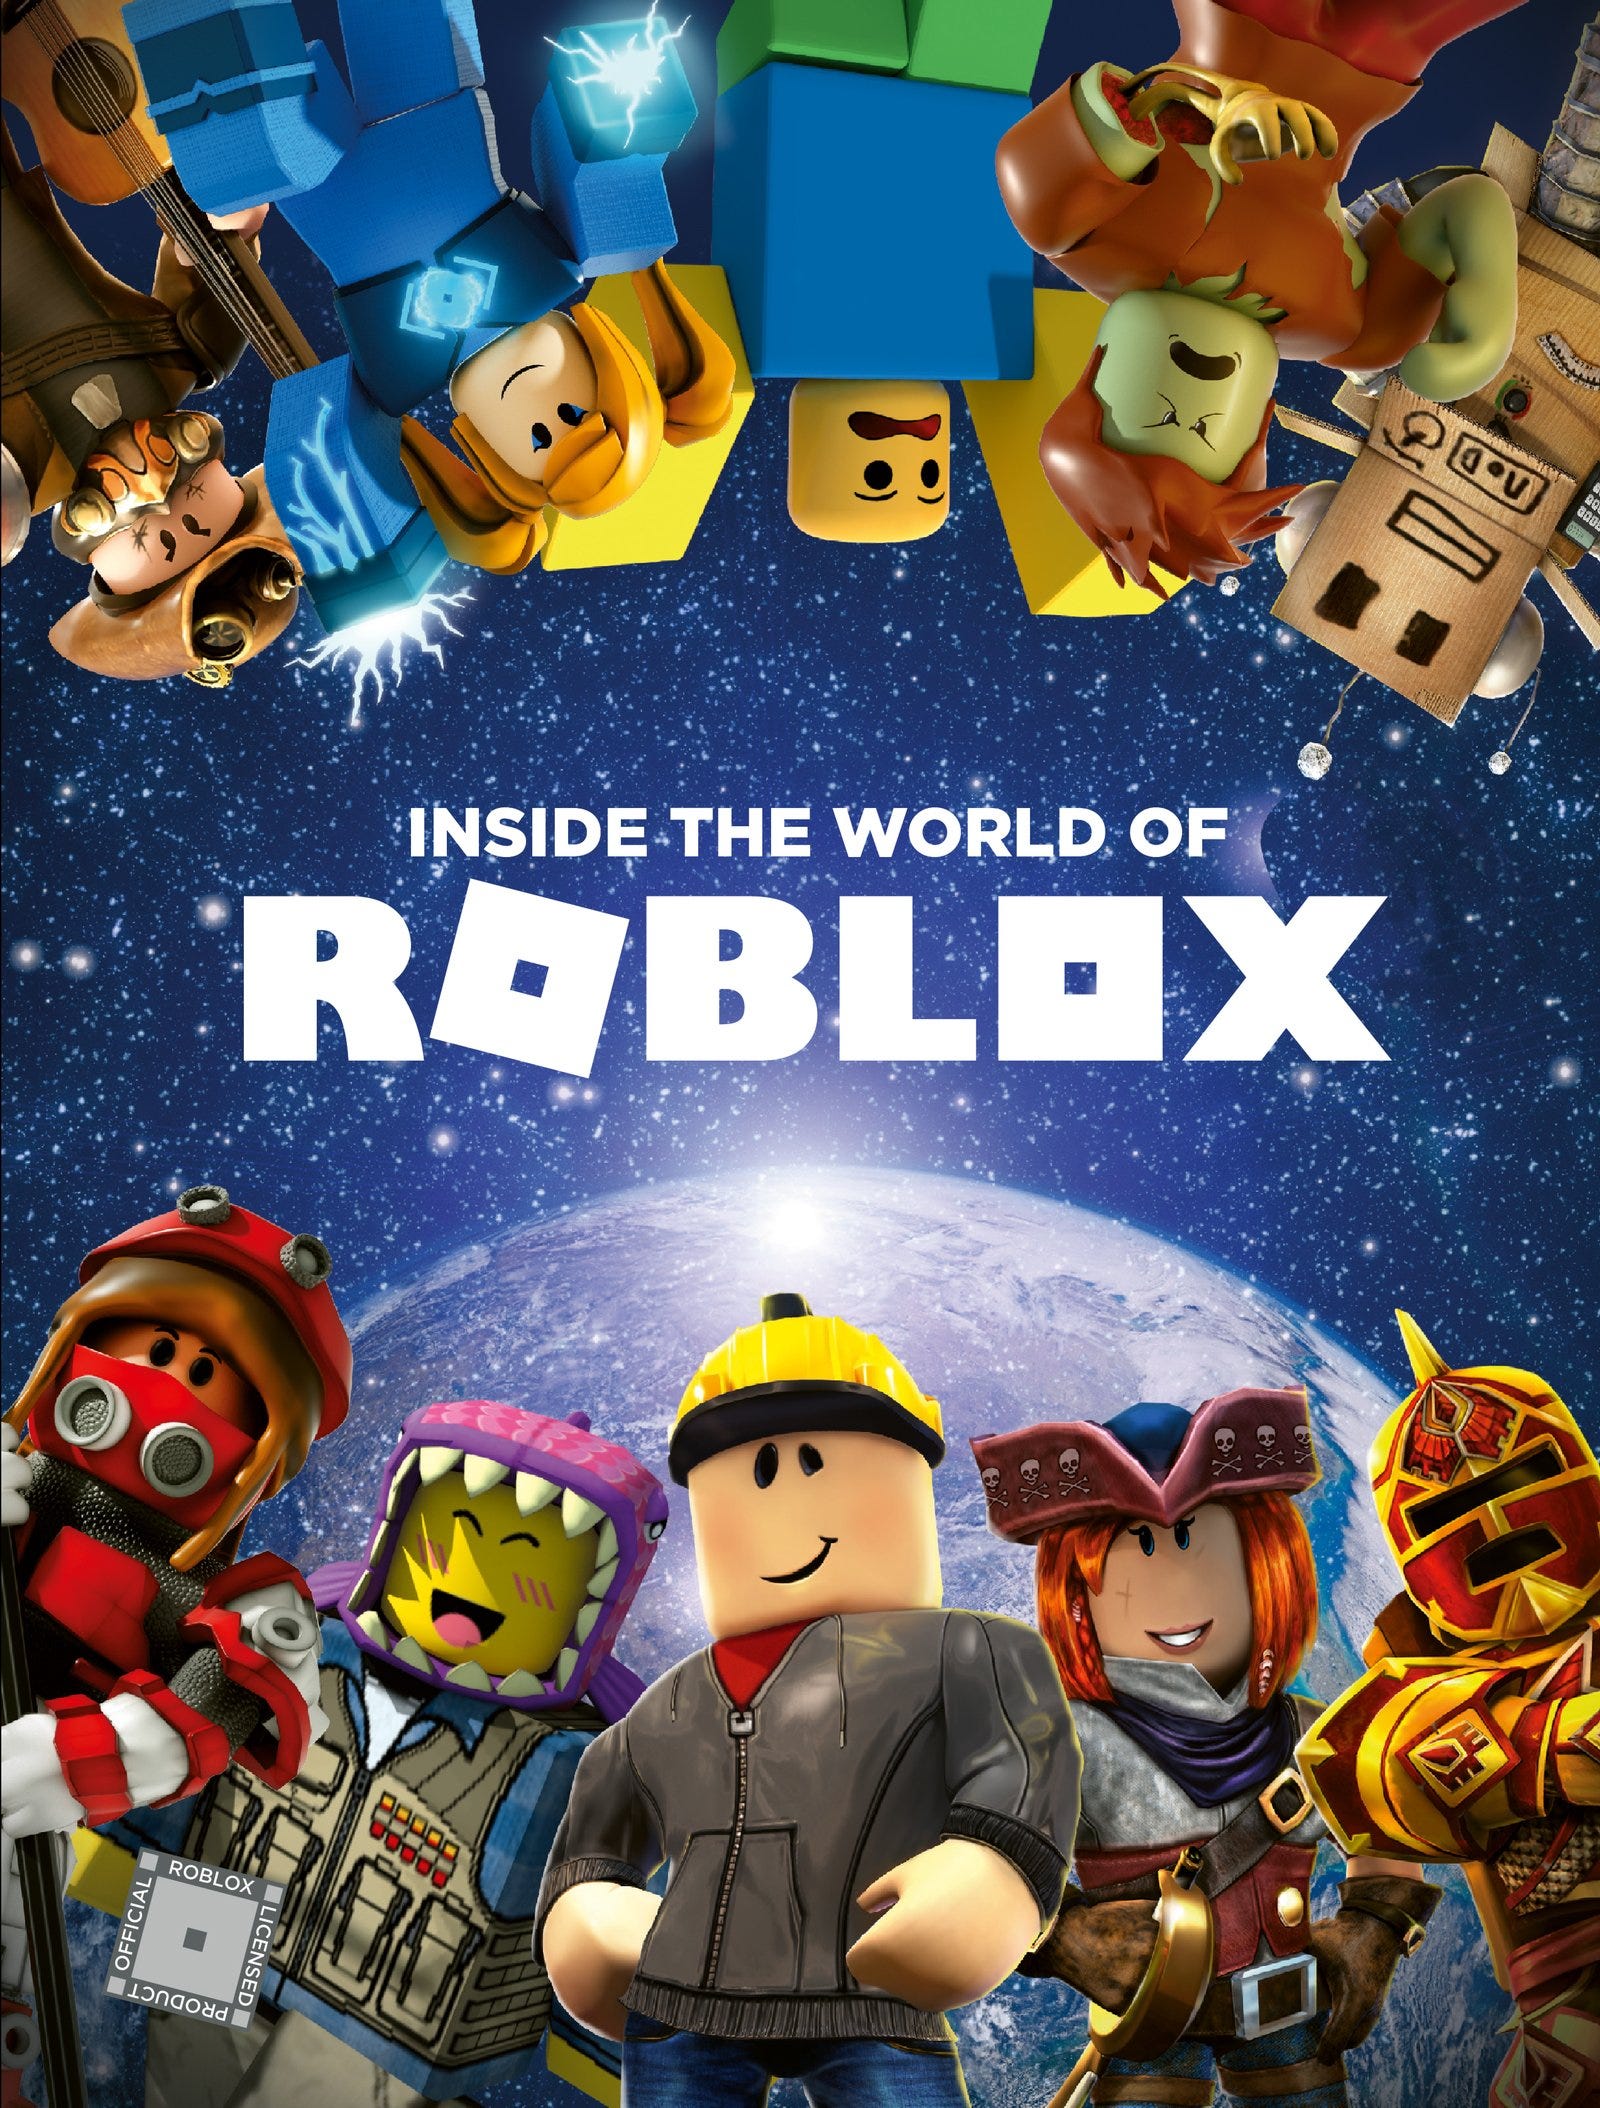 Roblox A Revolution The Online Gaming Platform Roblox Has By Theblogcrafter Medium - roblox san andreas multiplayer